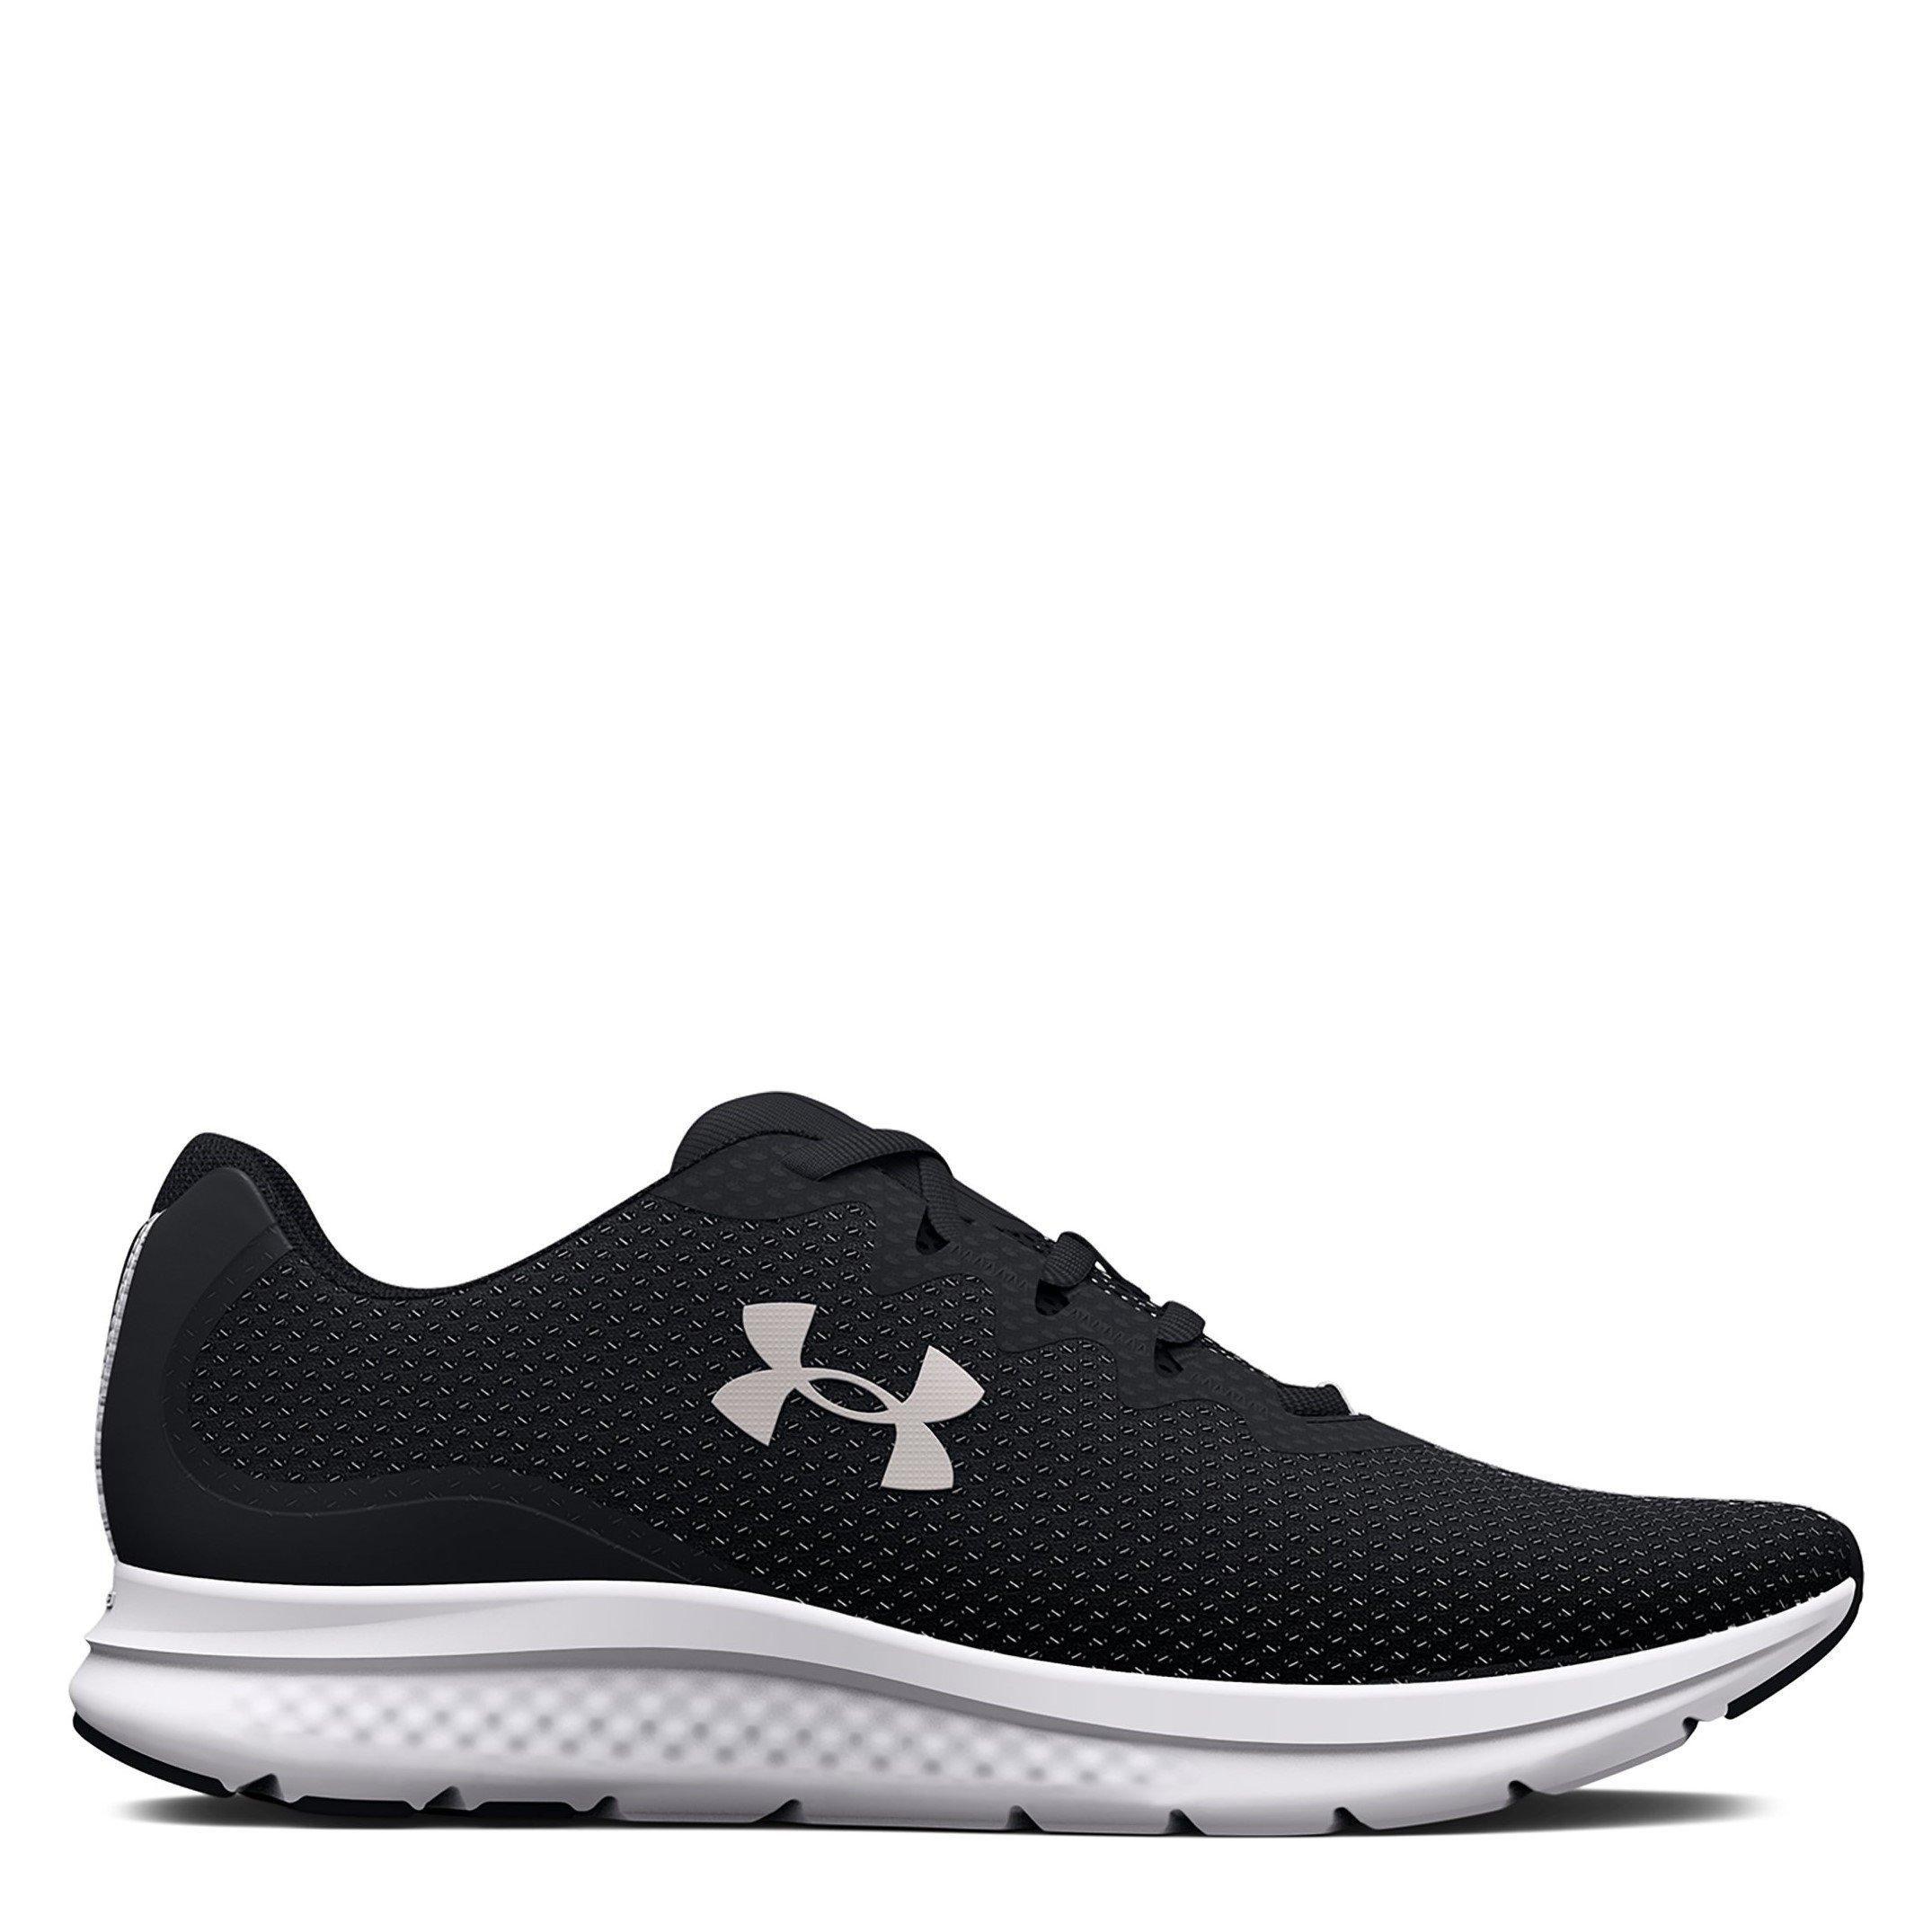 Under Armour | Charged impulse 3 Mens Running Shoes | Runners | Sports ...